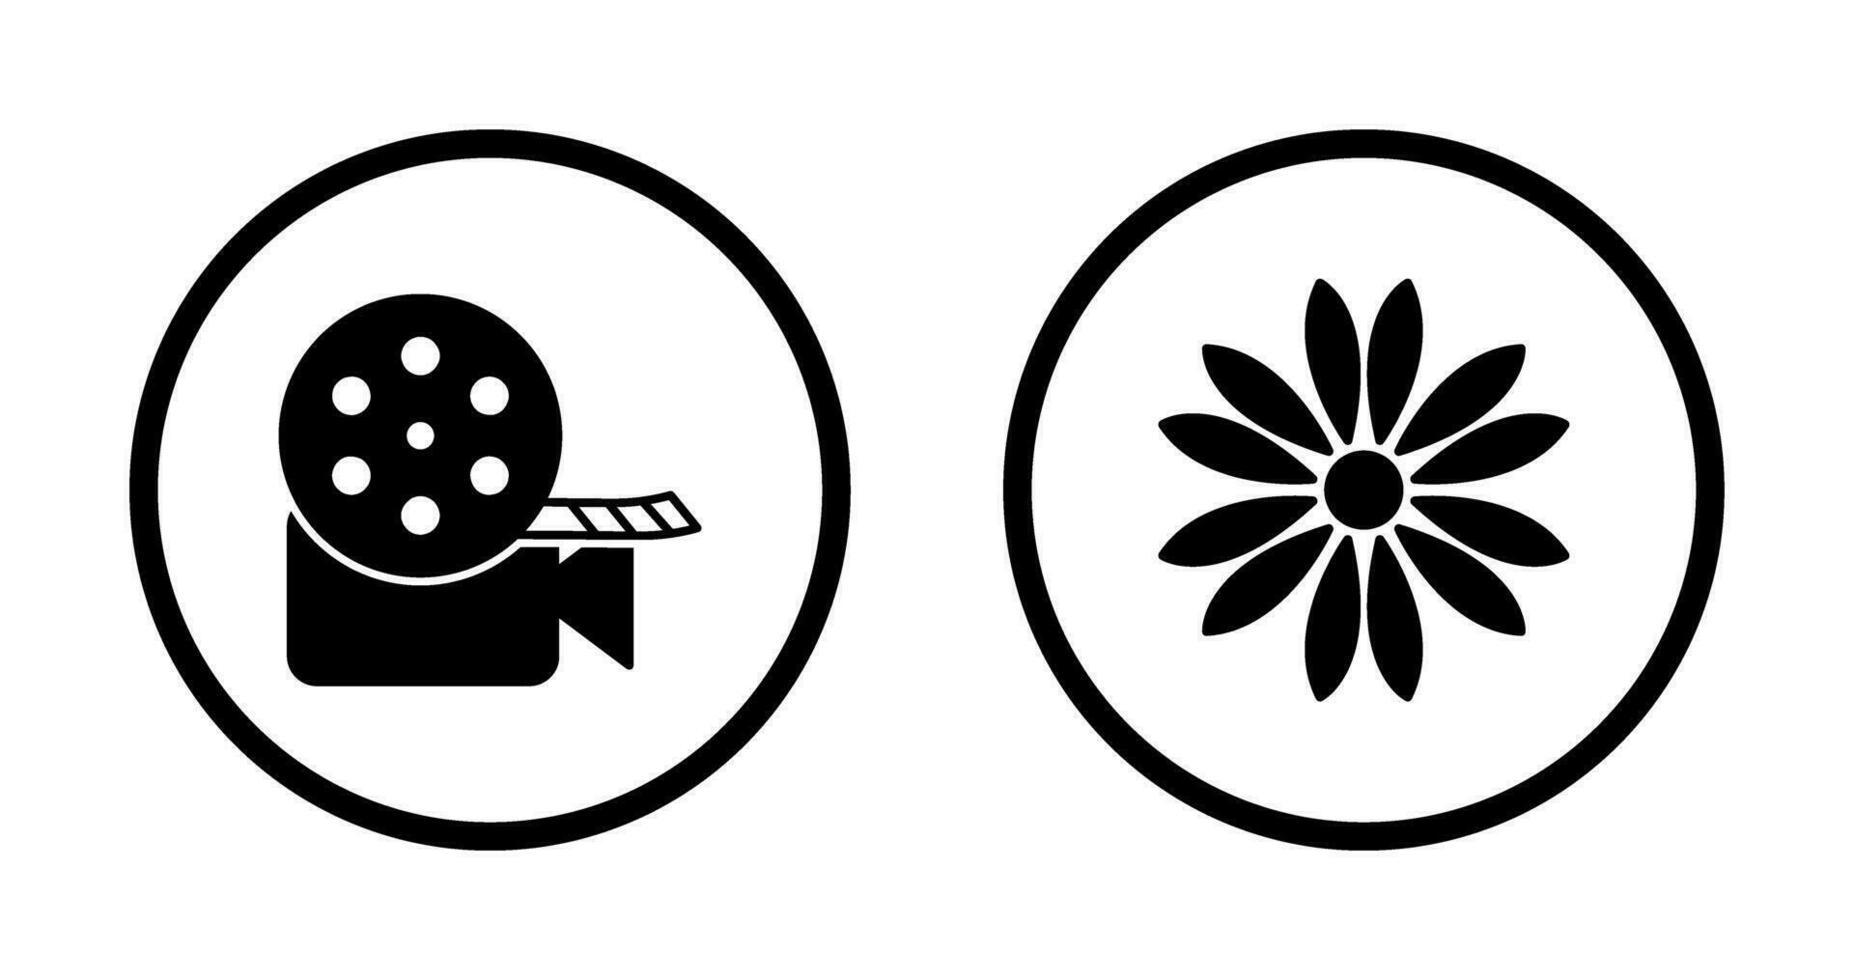 video reel and flower Icon vector